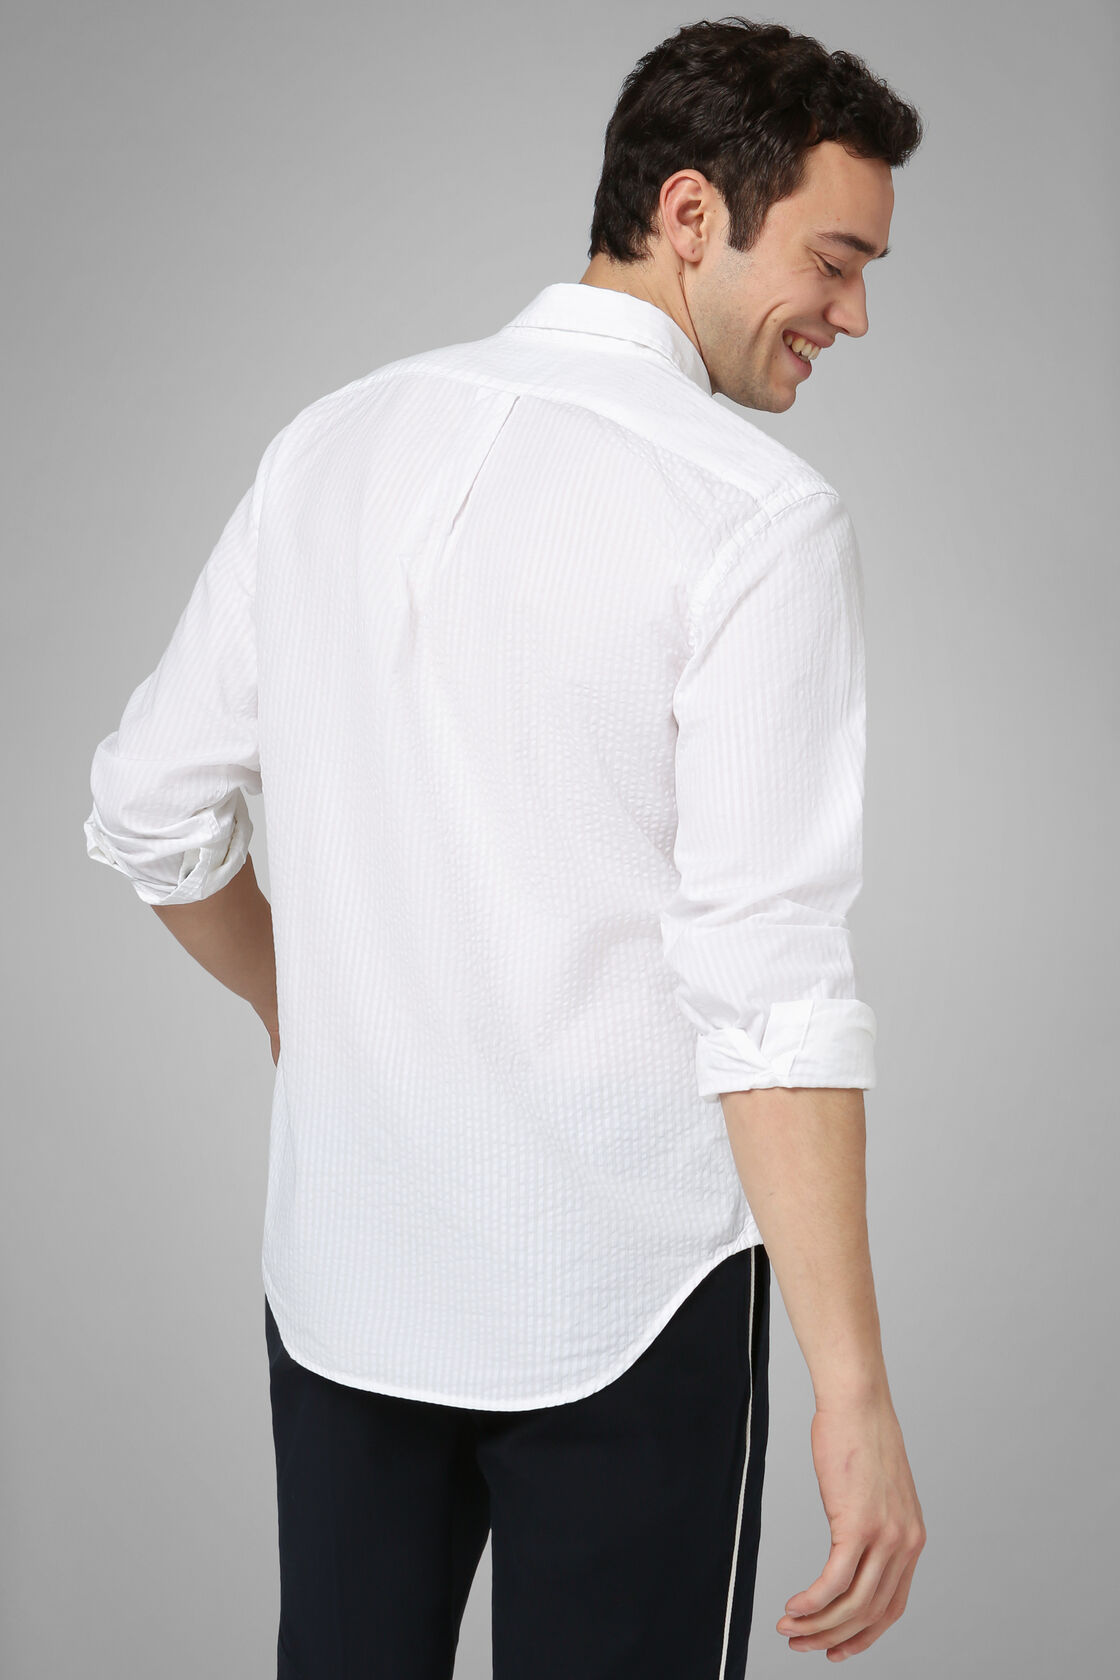 Regular Fit White Shirt With Button Down Collar, White, hi-res